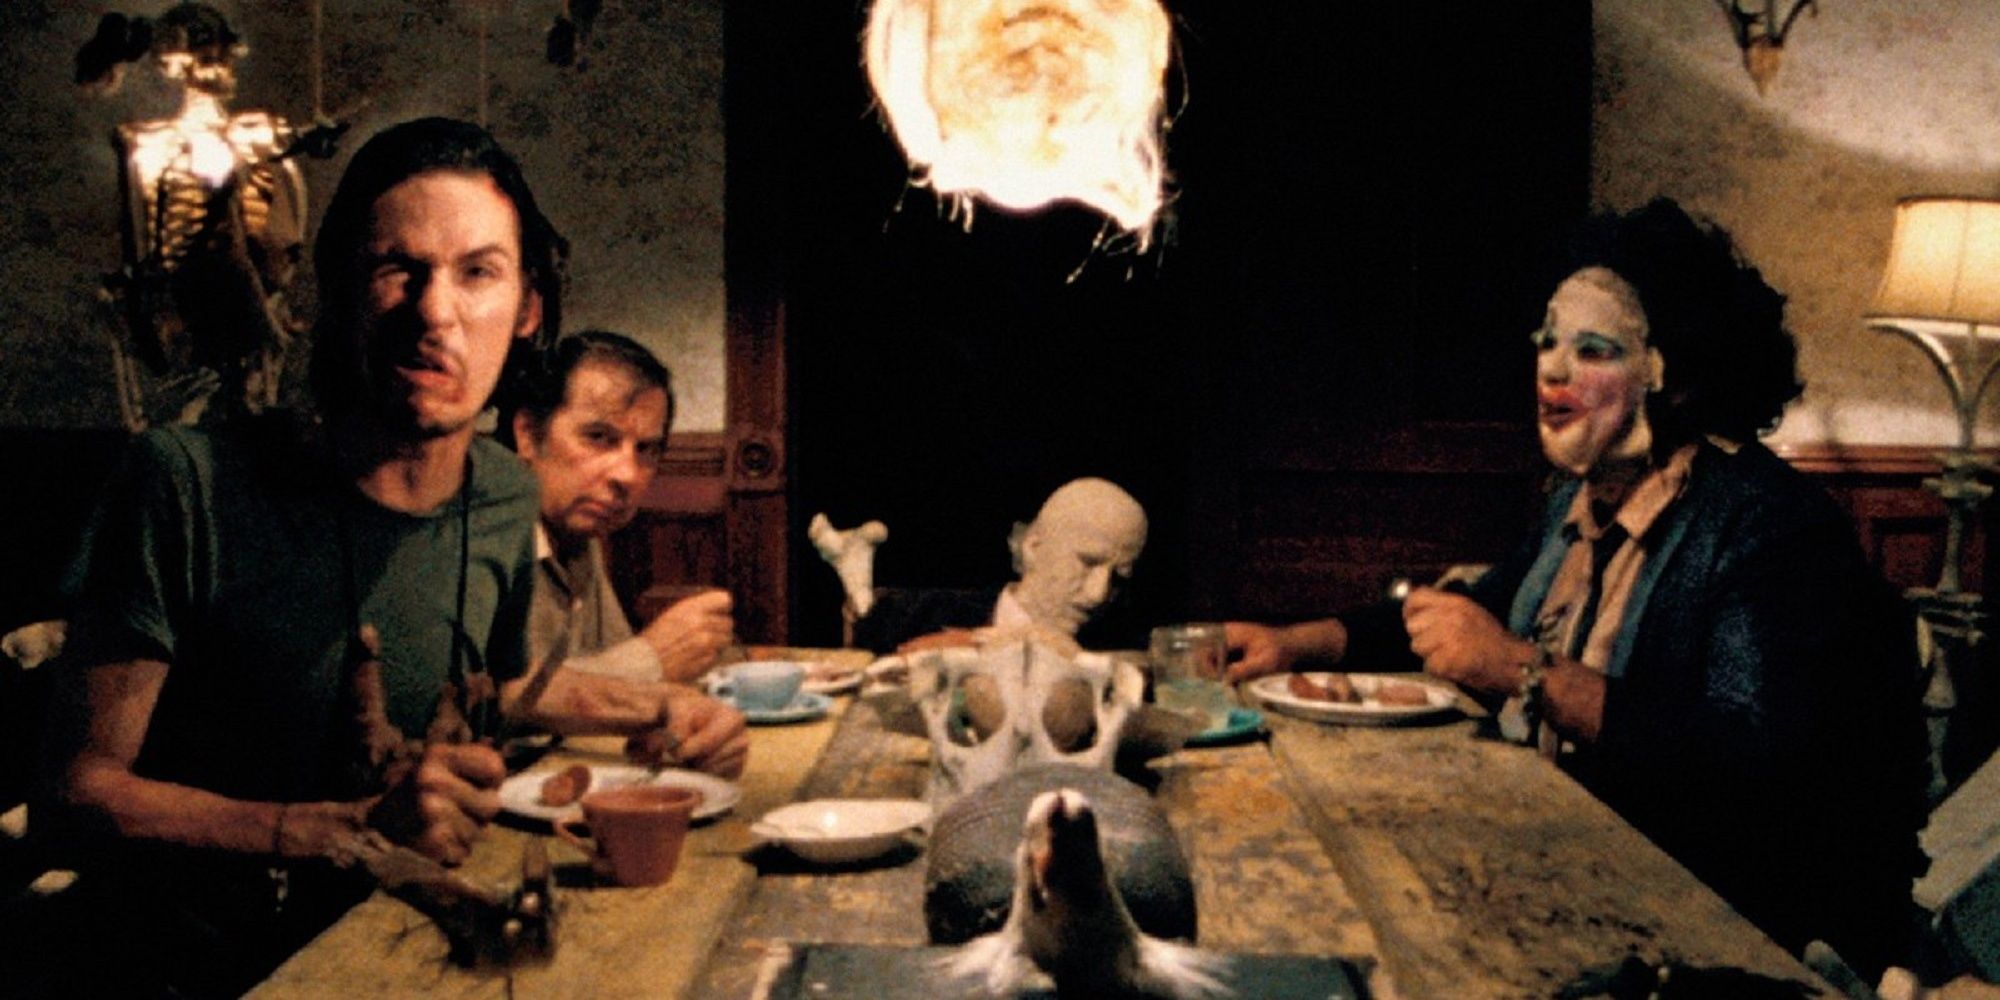 The Saywer family sitting around the table to eat dinner in 'The Texas Chainsaw Massacre.'